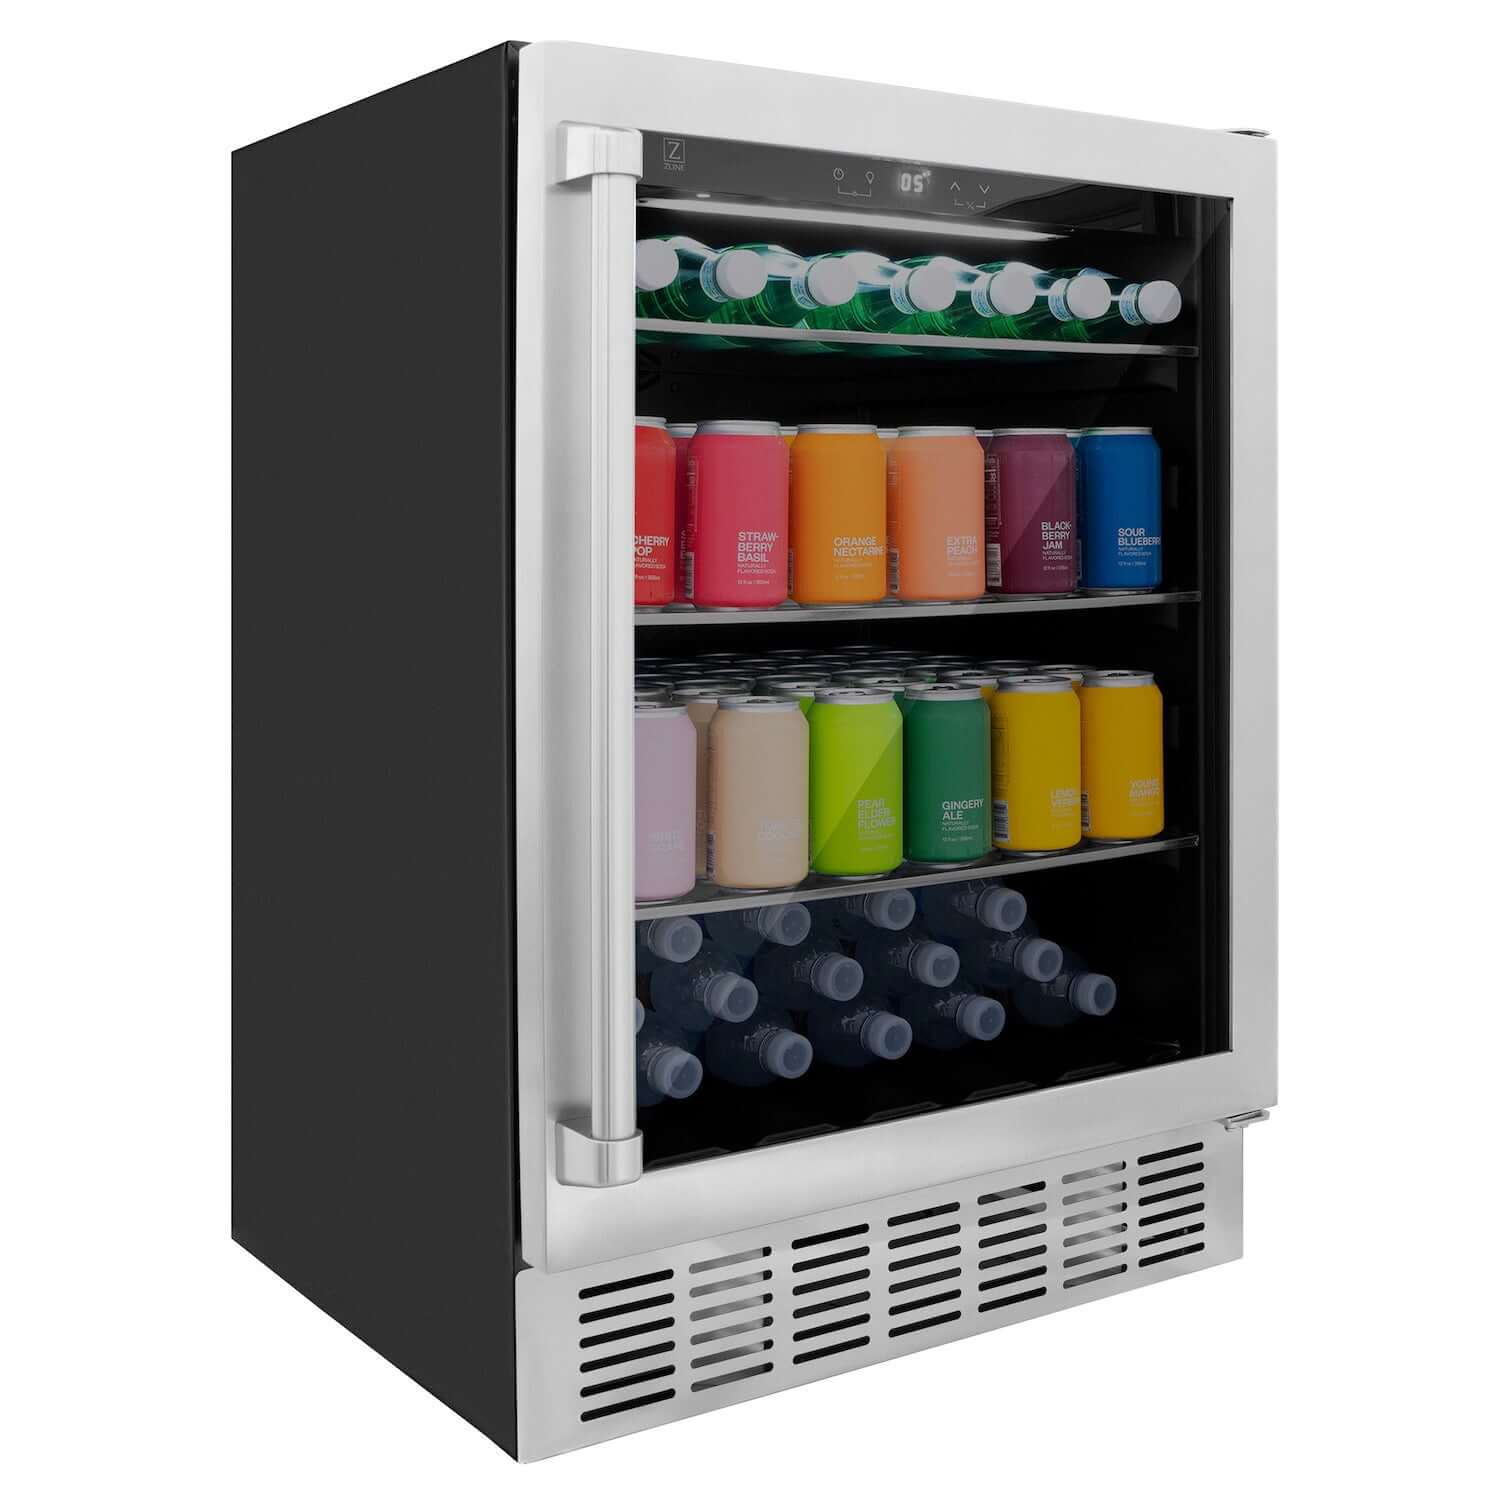 ZLINE beverage center with 3 levels of colorful drinks inside wide angle from side.